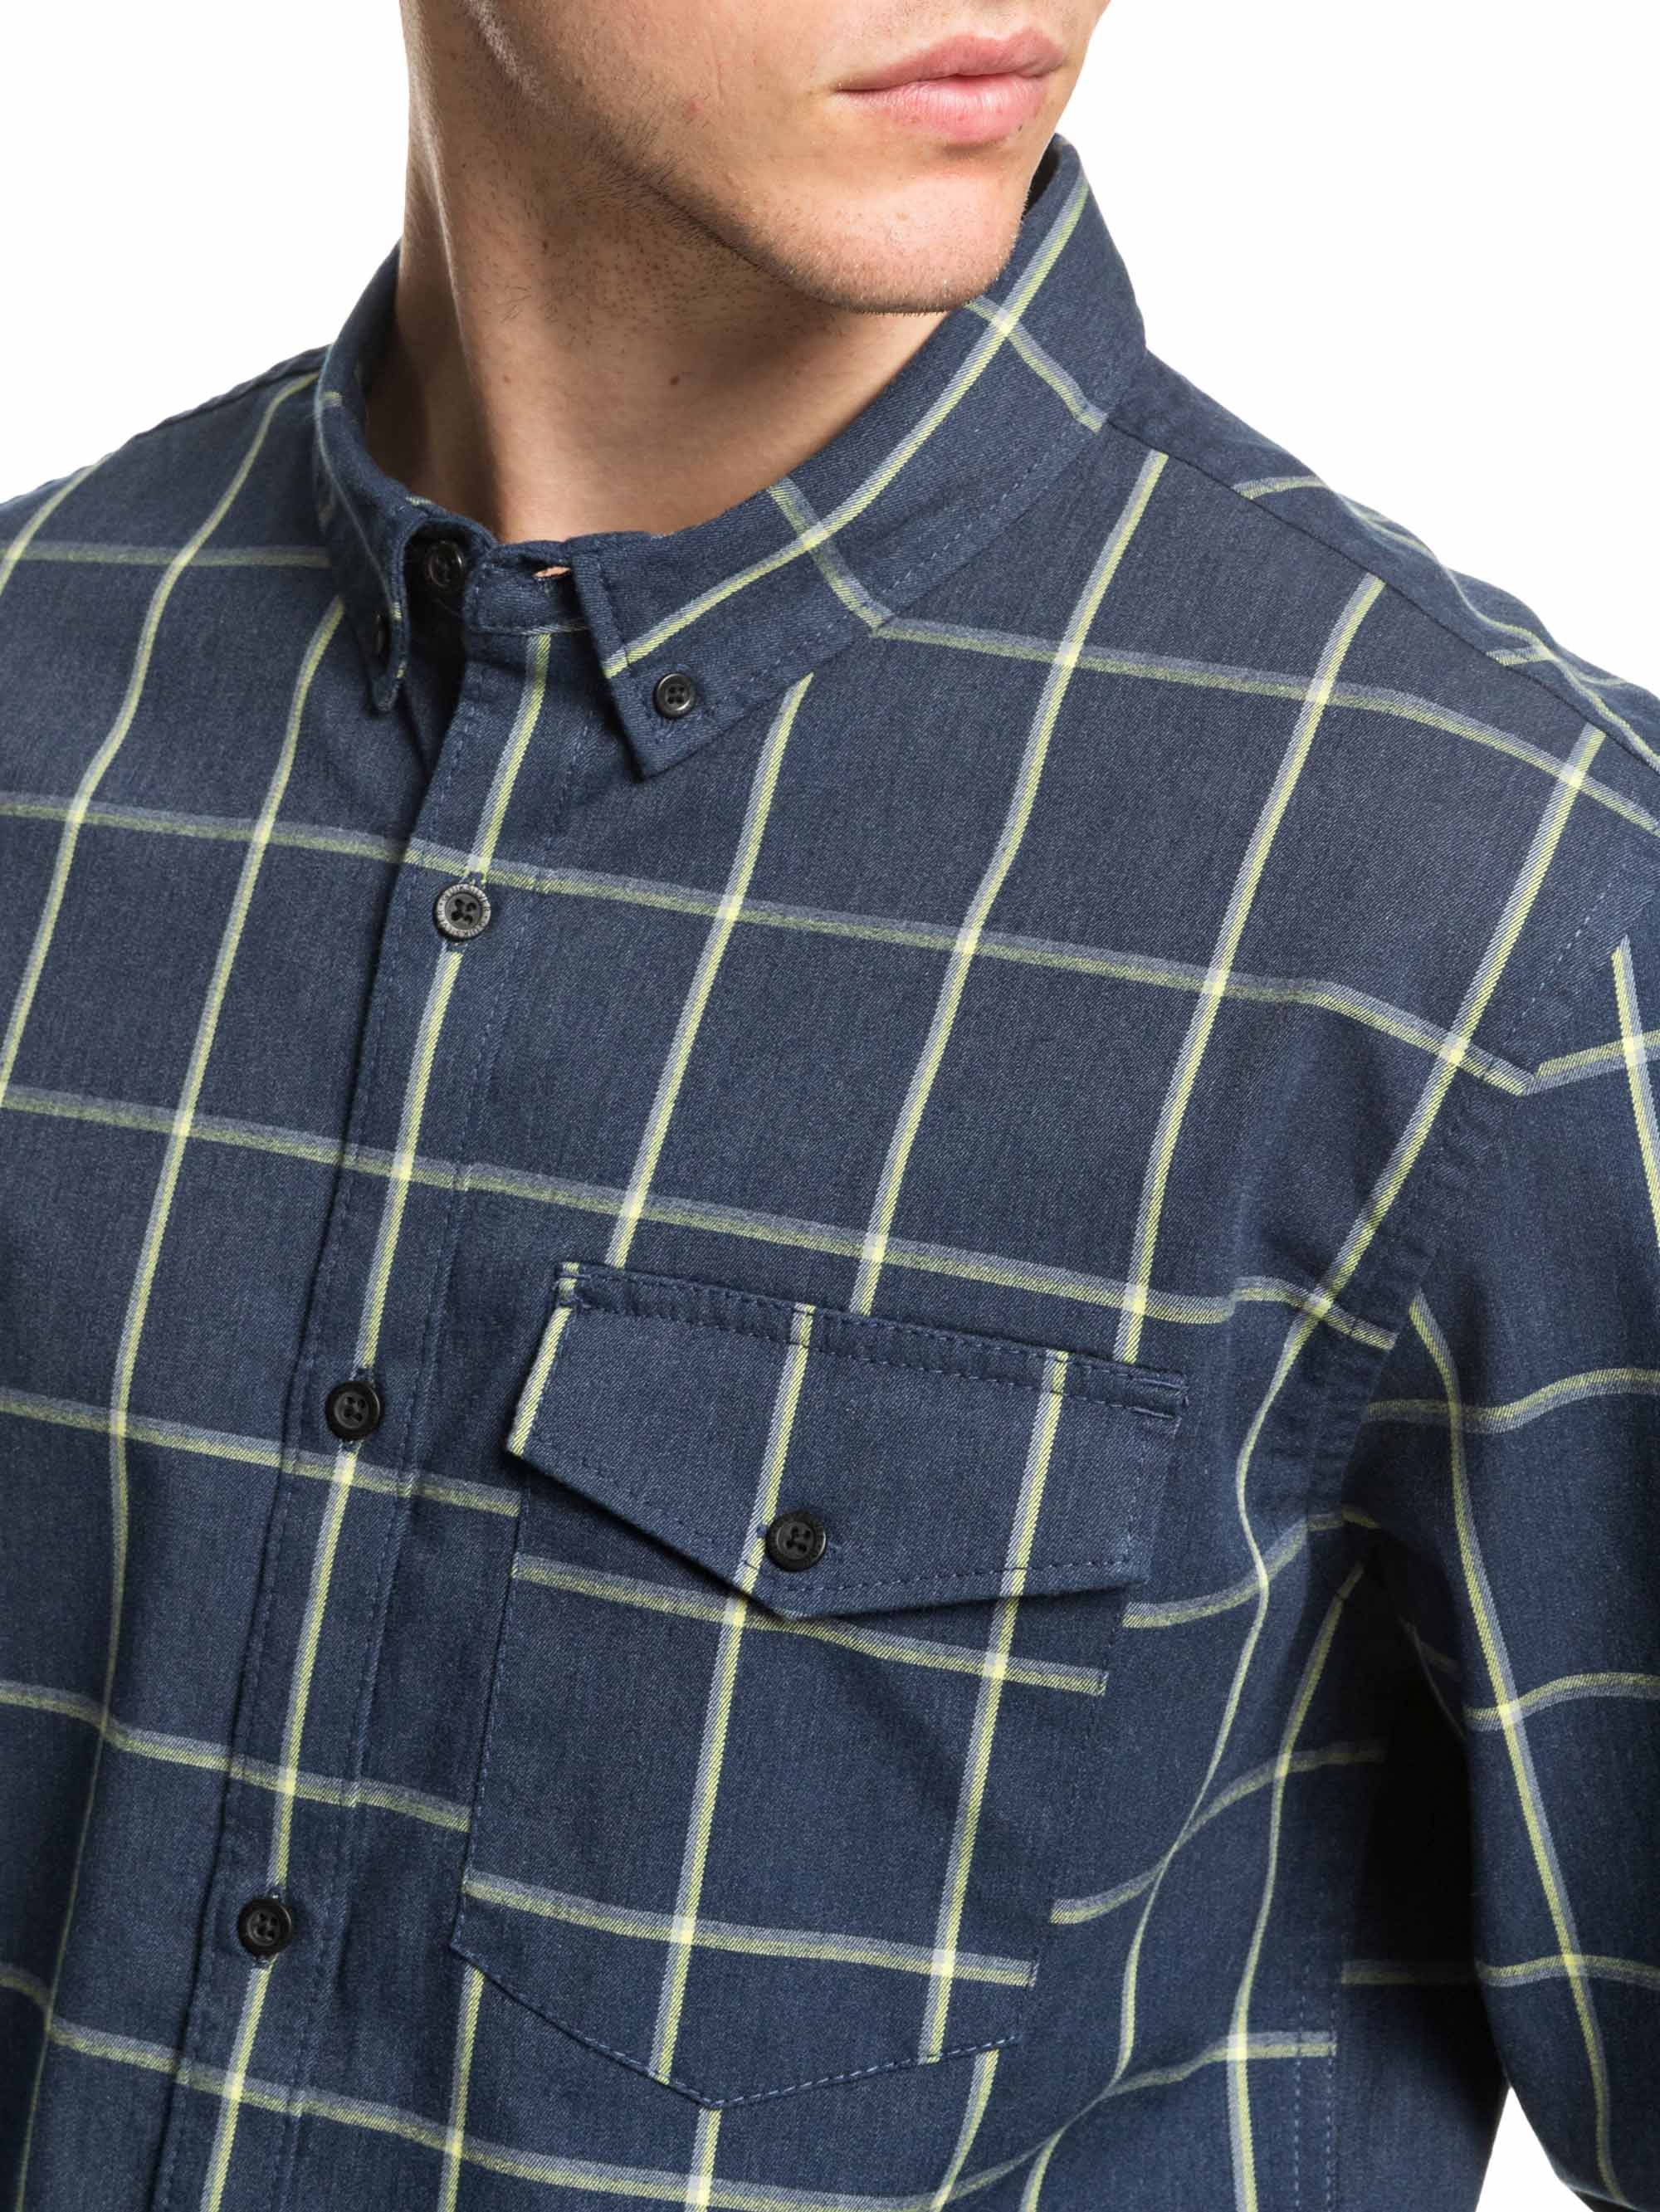 MISTY HEIGHTS LONGSLEEVE CHECKED SHIRT